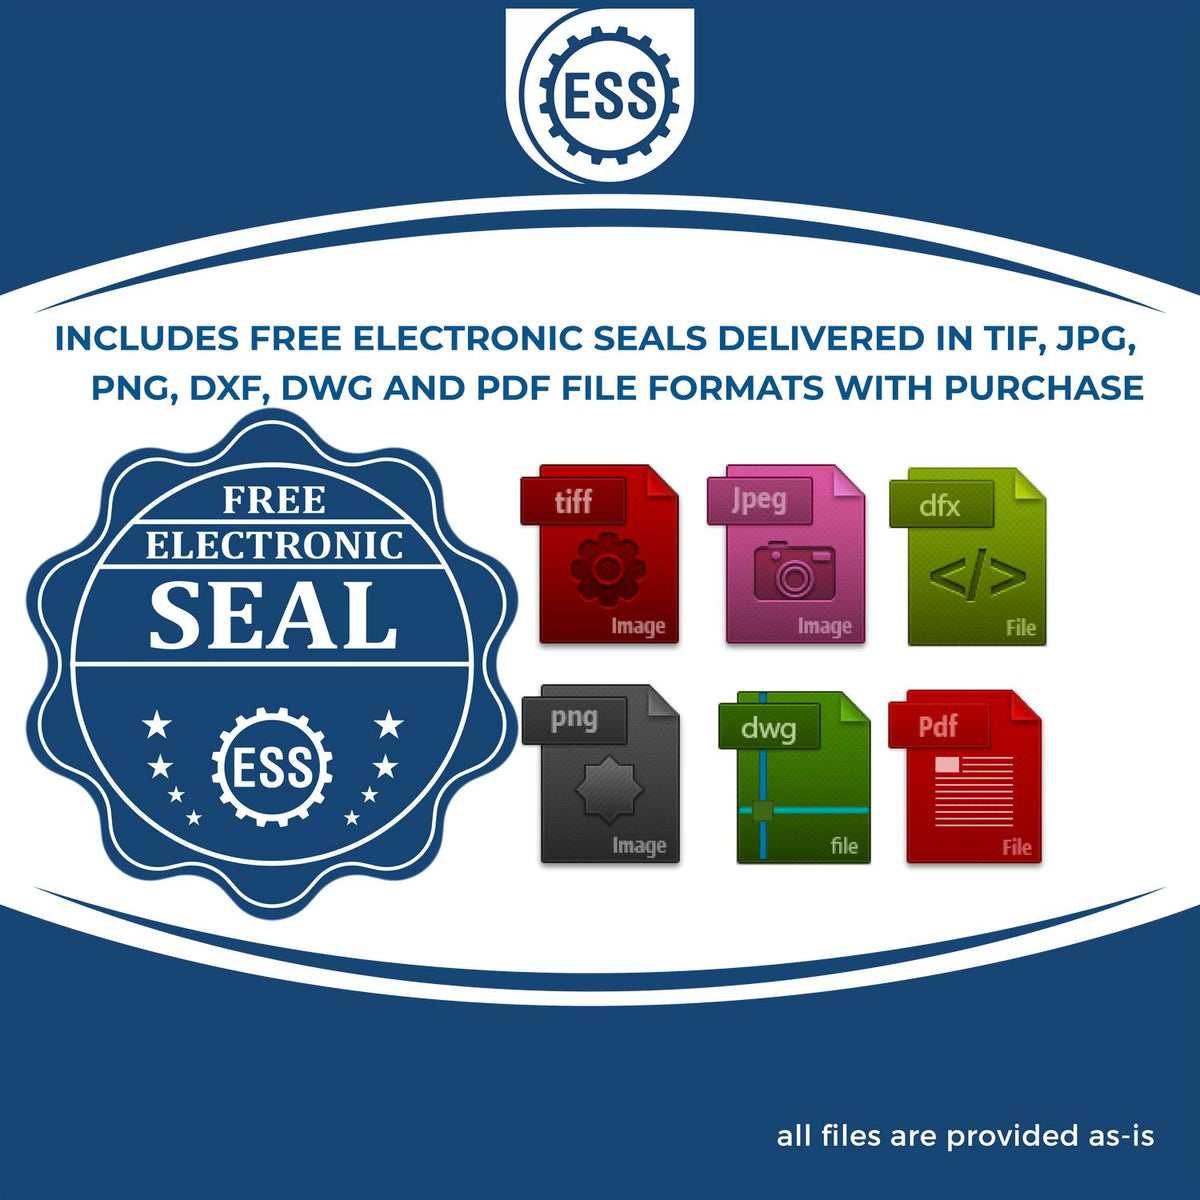 An infographic for the free electronic seal for the State of Iowa Extended Long Reach Engineer Seal illustrating the different file type icons such as DXF, DWG, TIF, JPG and PNG.